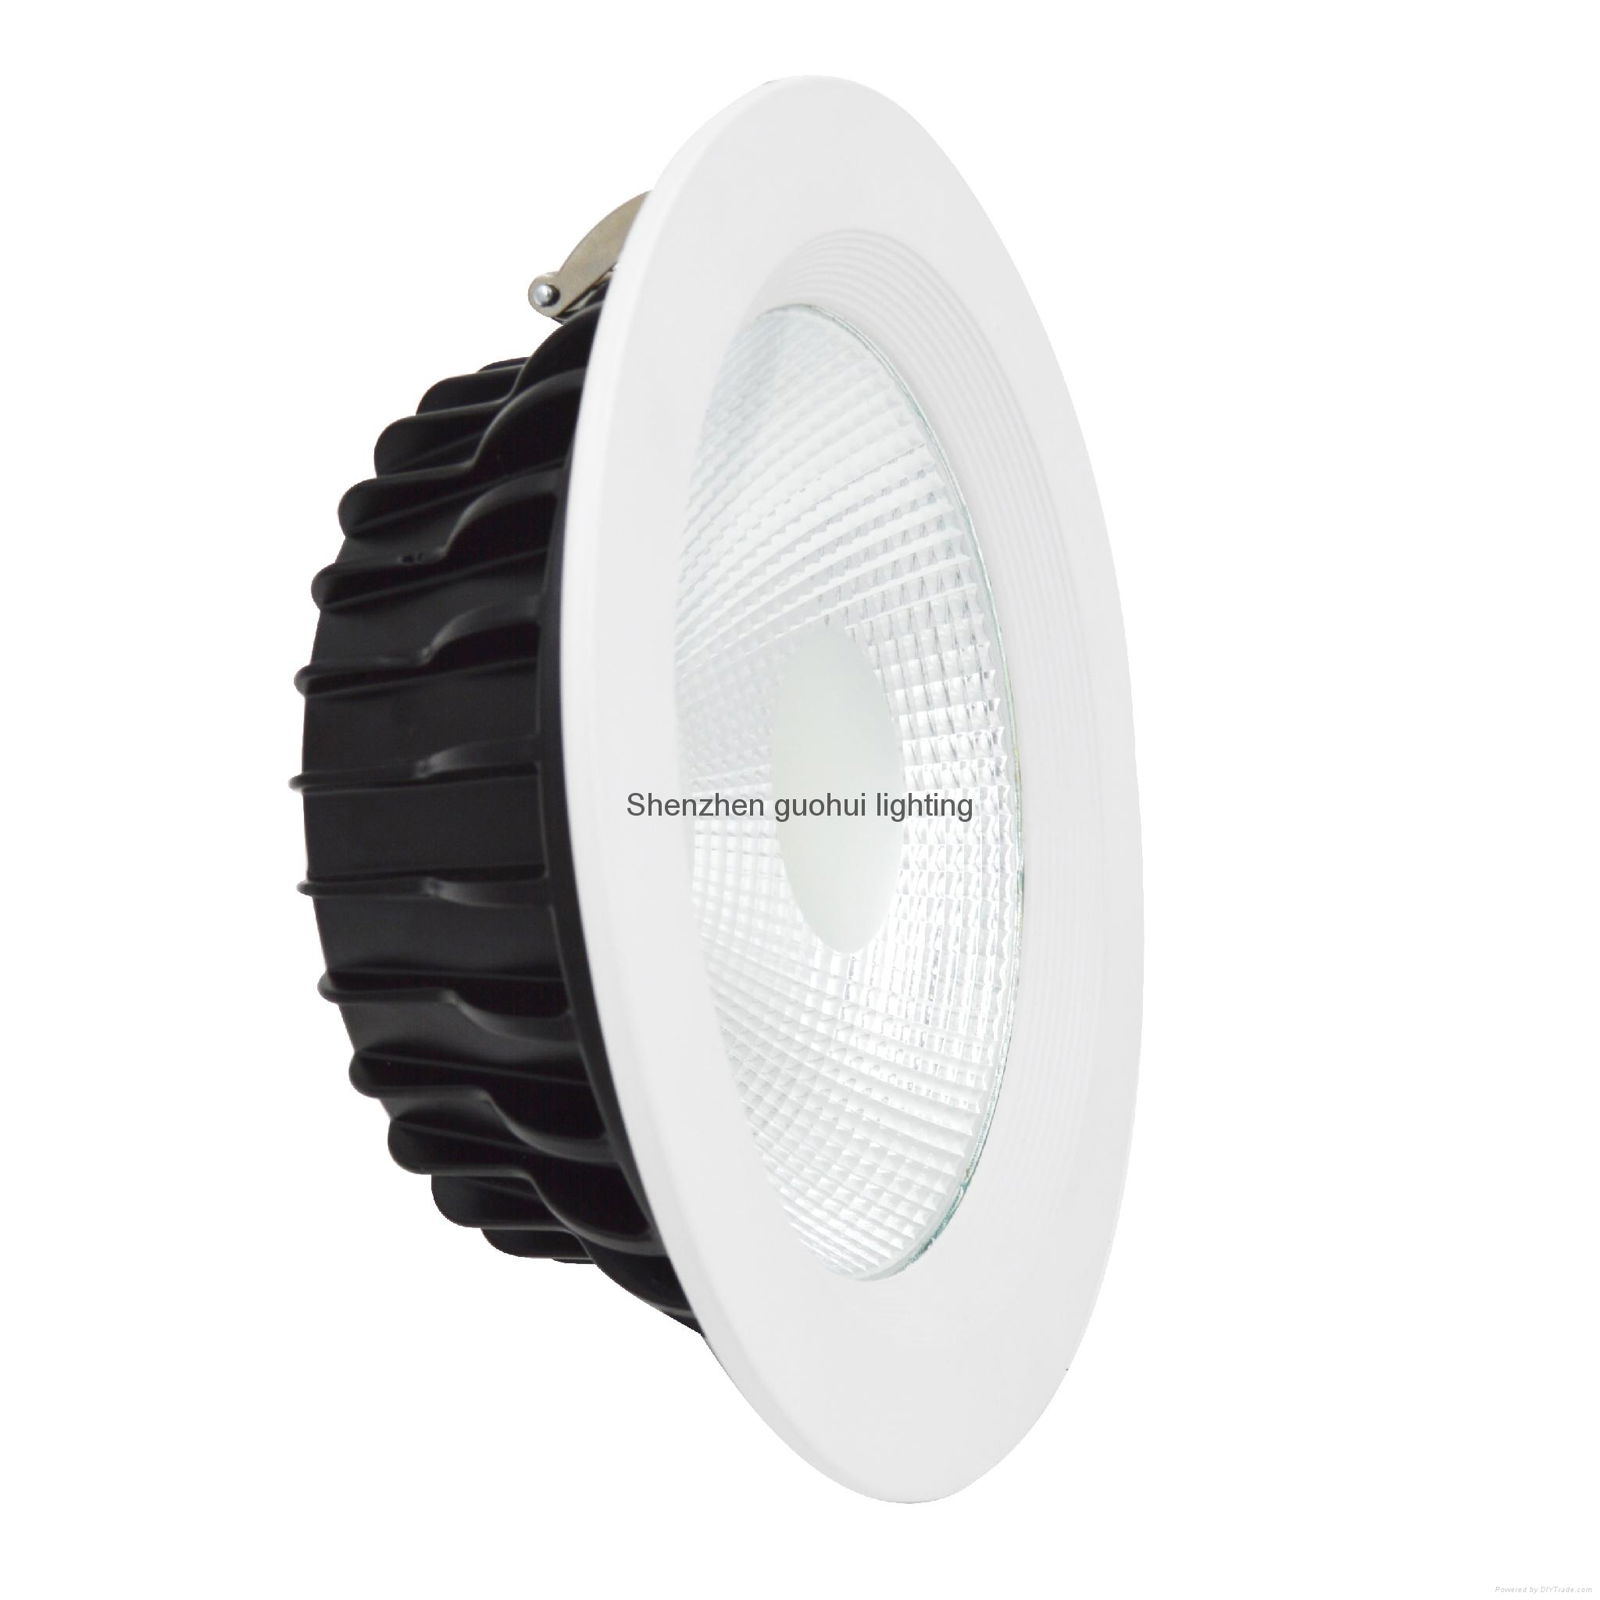 7W led cob downlight from manufacturer with high quality and easy to install 4